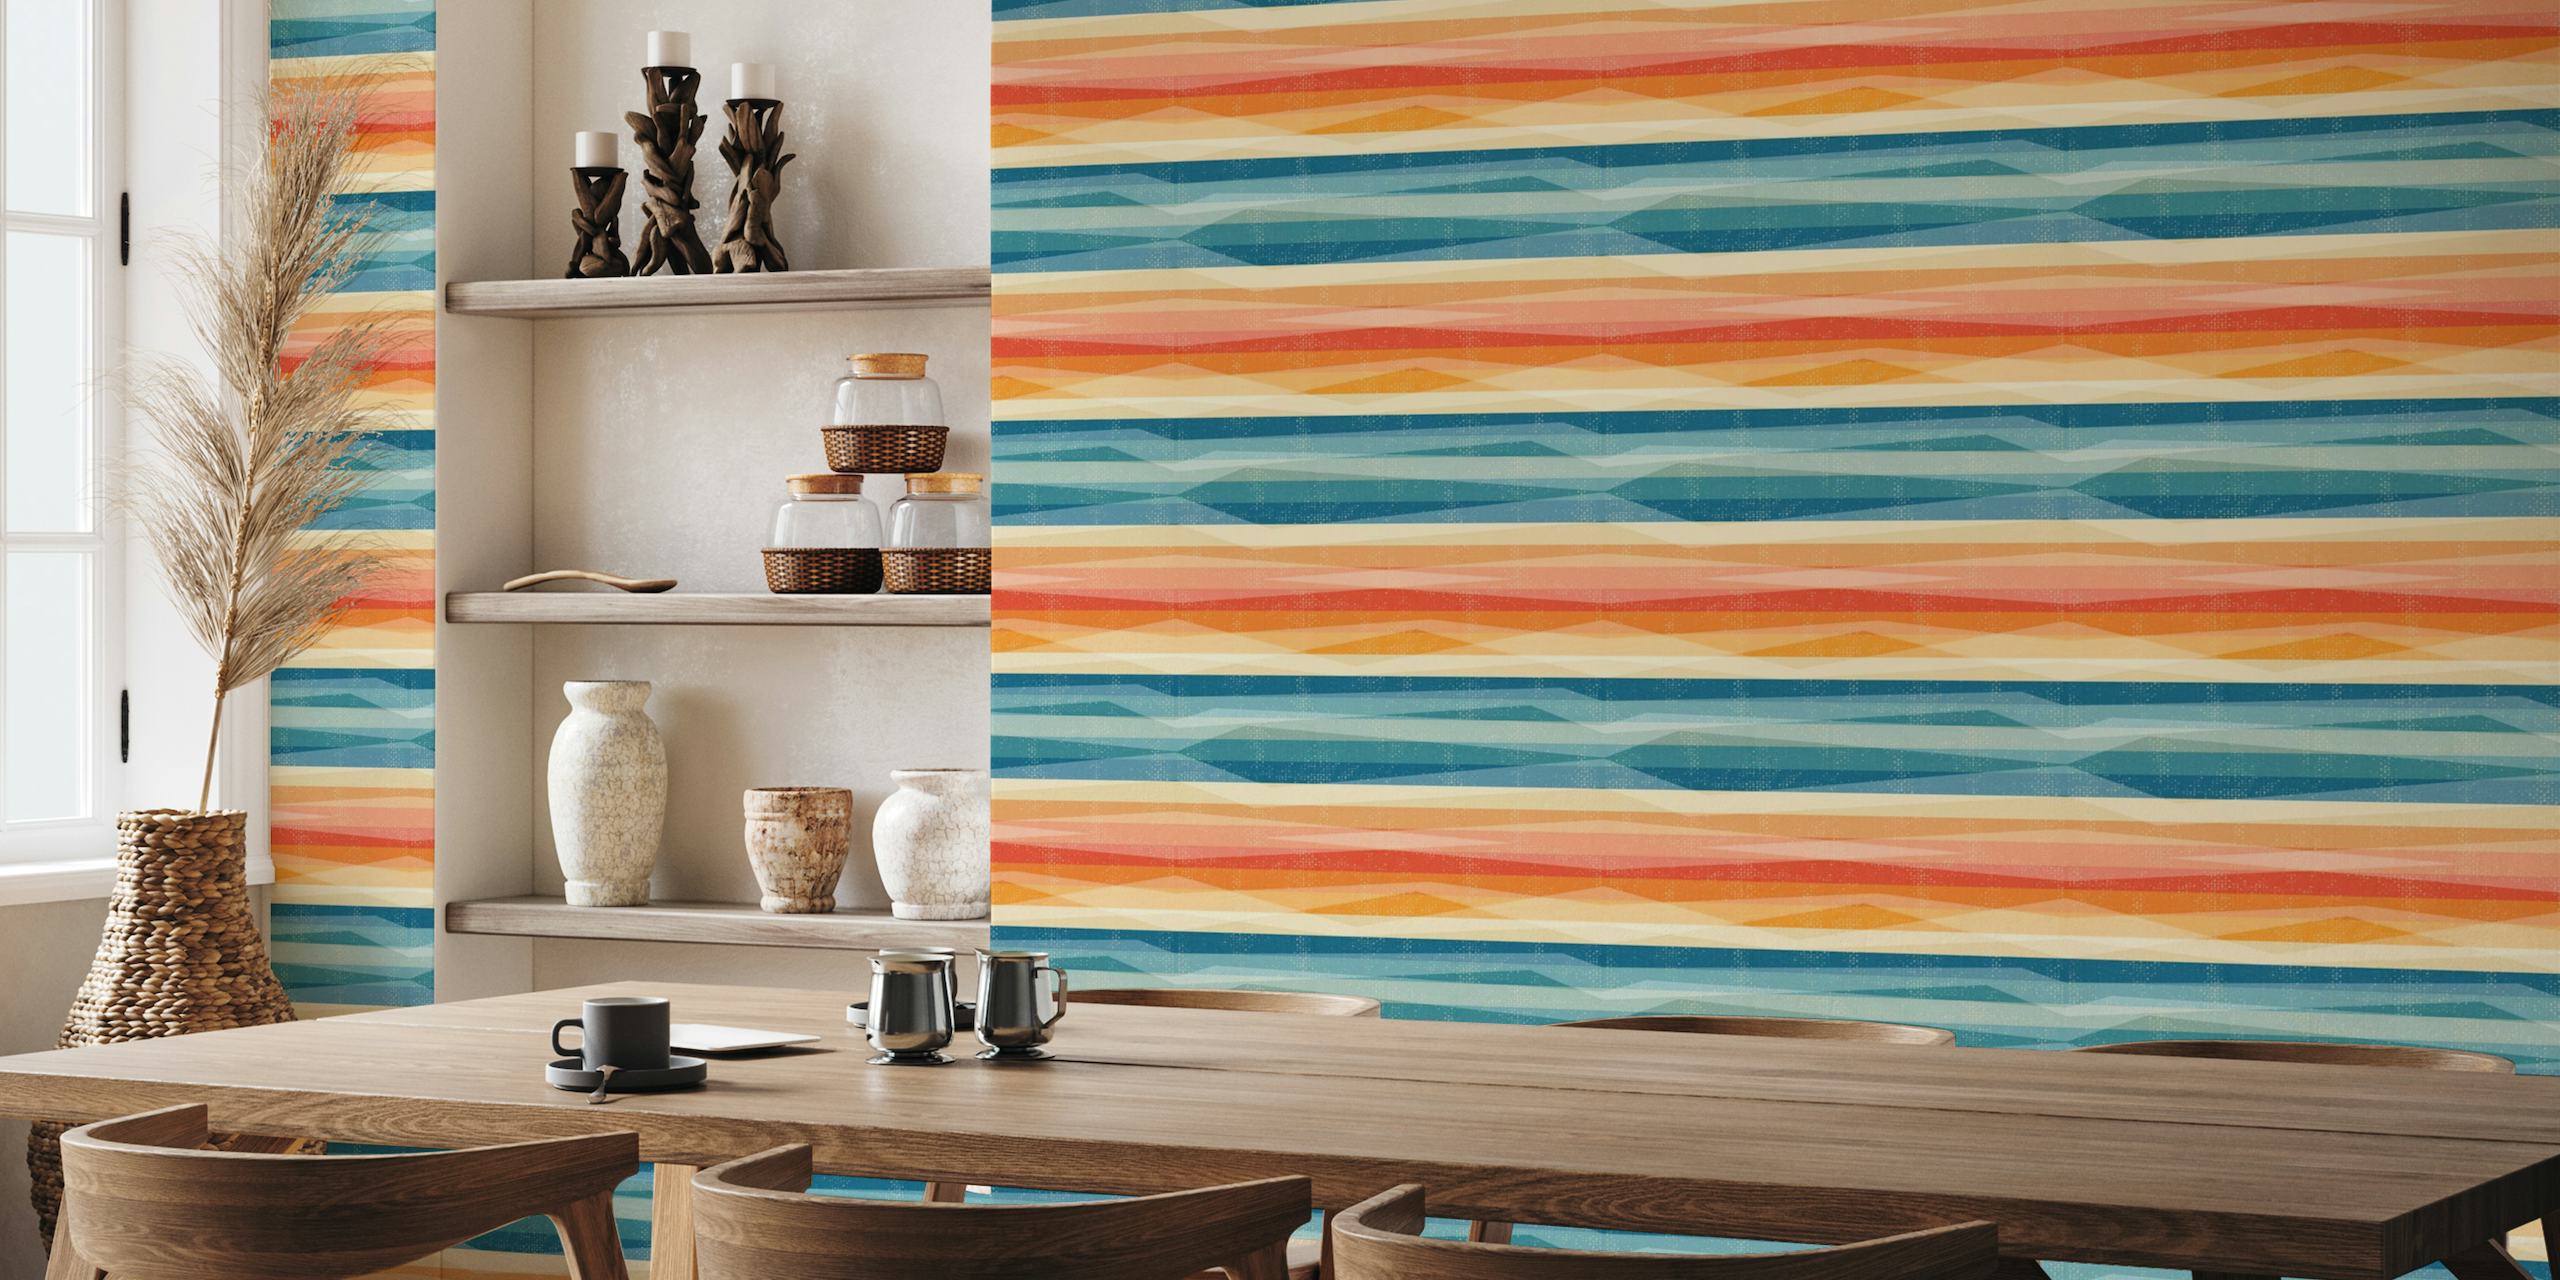 Horizontal retro stripes wall mural in soft blues, oranges, and neutrals